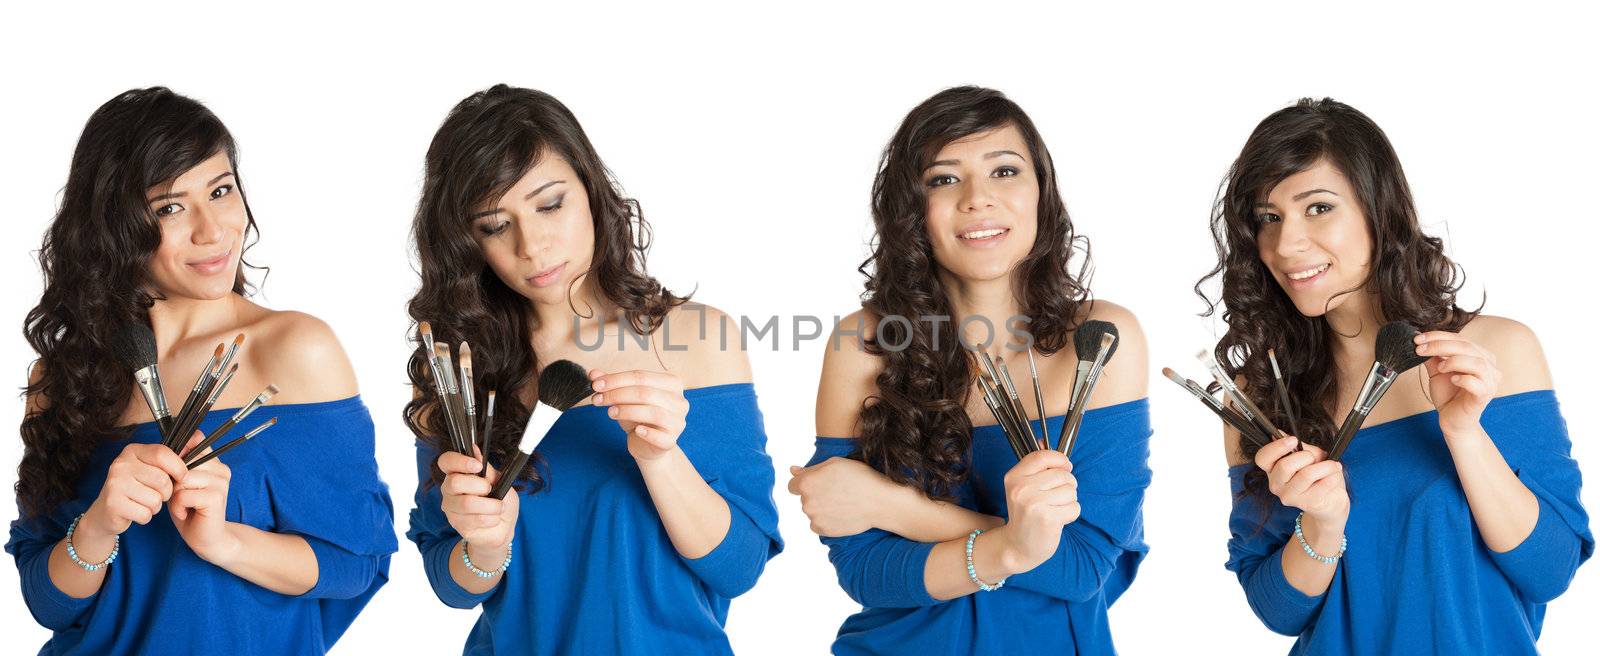 Collage of a woman with makeup brushes by raduga21